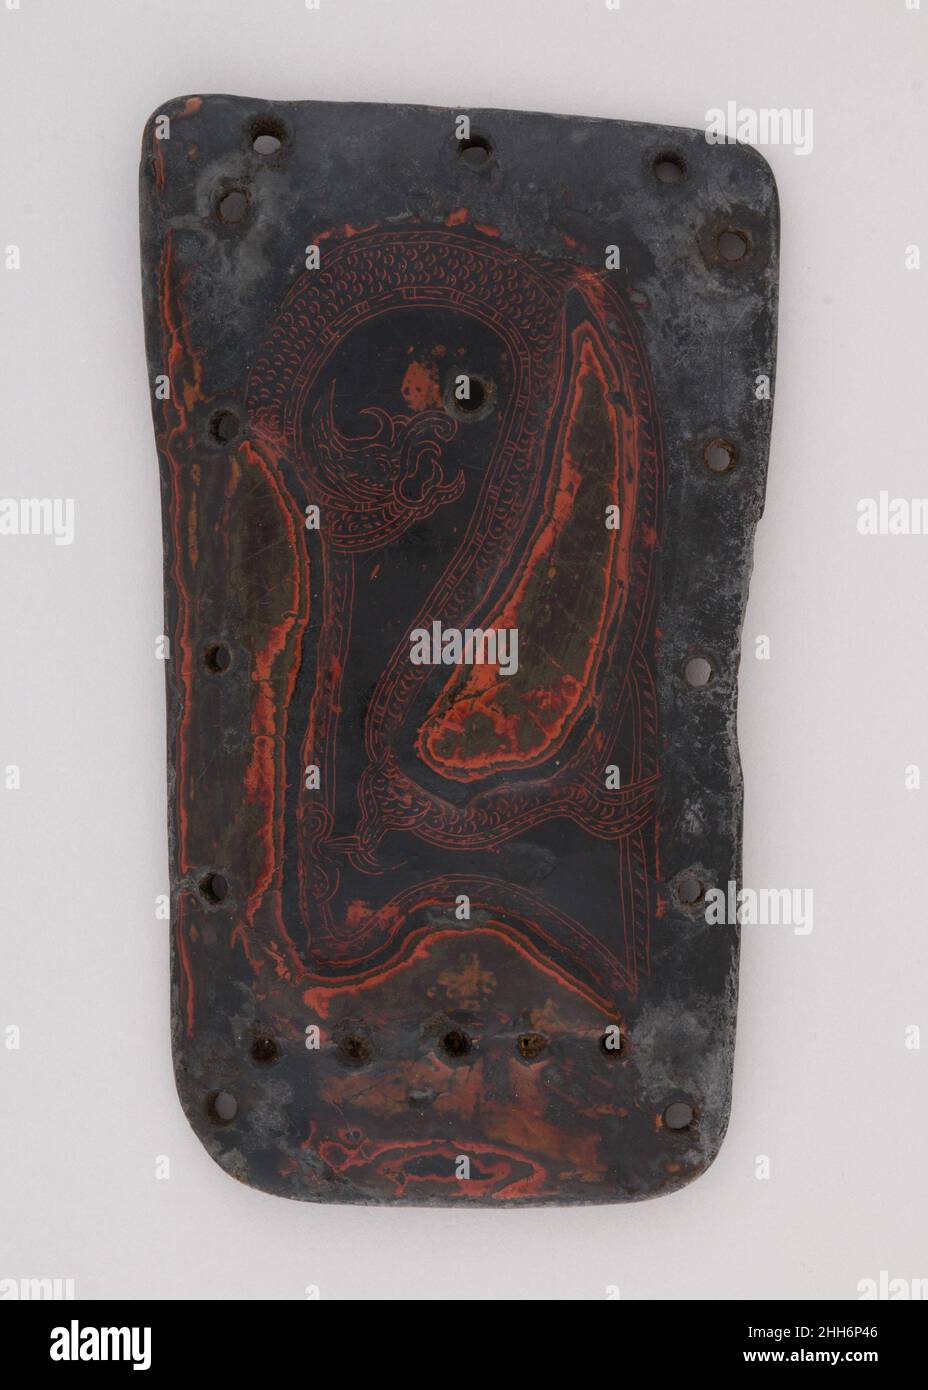 Element from a Lacquered Leather Cuirass 8th–10th century Yi or Nuosu, China (Yunnan or Sichuan). Element from a Lacquered Leather Cuirass. Yi or Nuosu, China (Yunnan or Sichuan). 8th–10th century. Lacquer, leather. Yunnan; Sichuan. Armor for Man Stock Photo